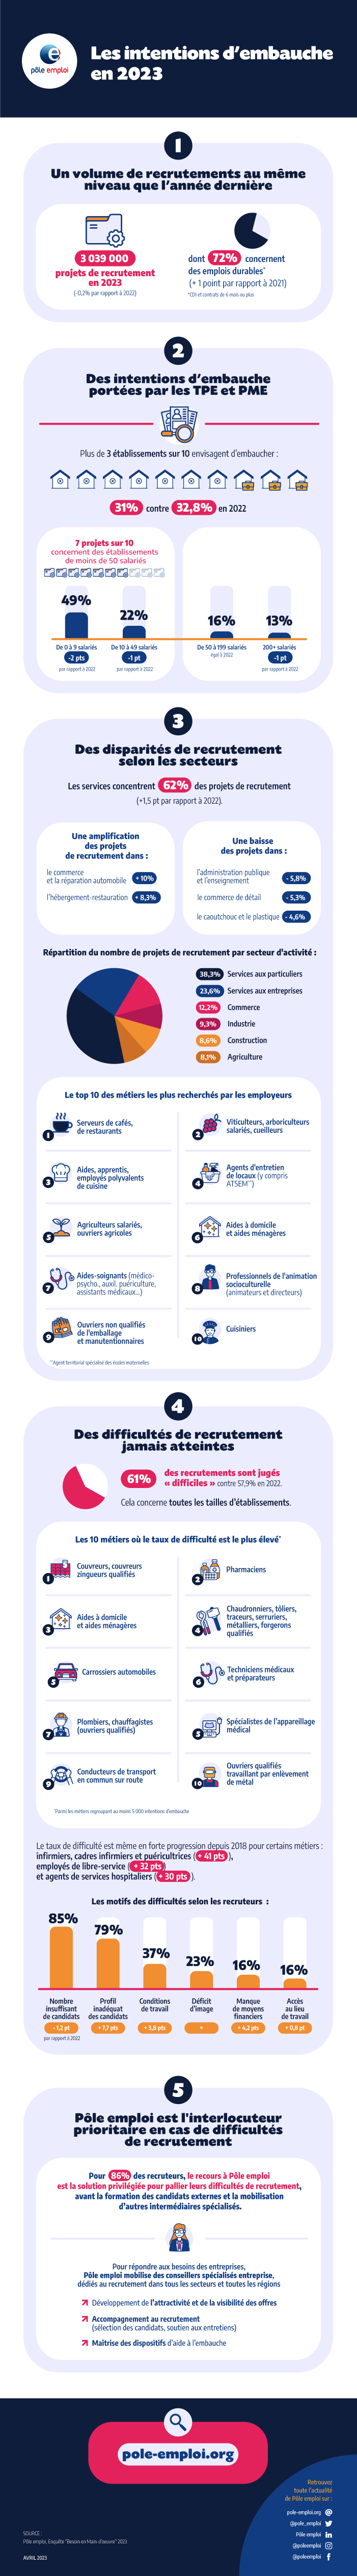 PE-infographie-intentions-embauche.png